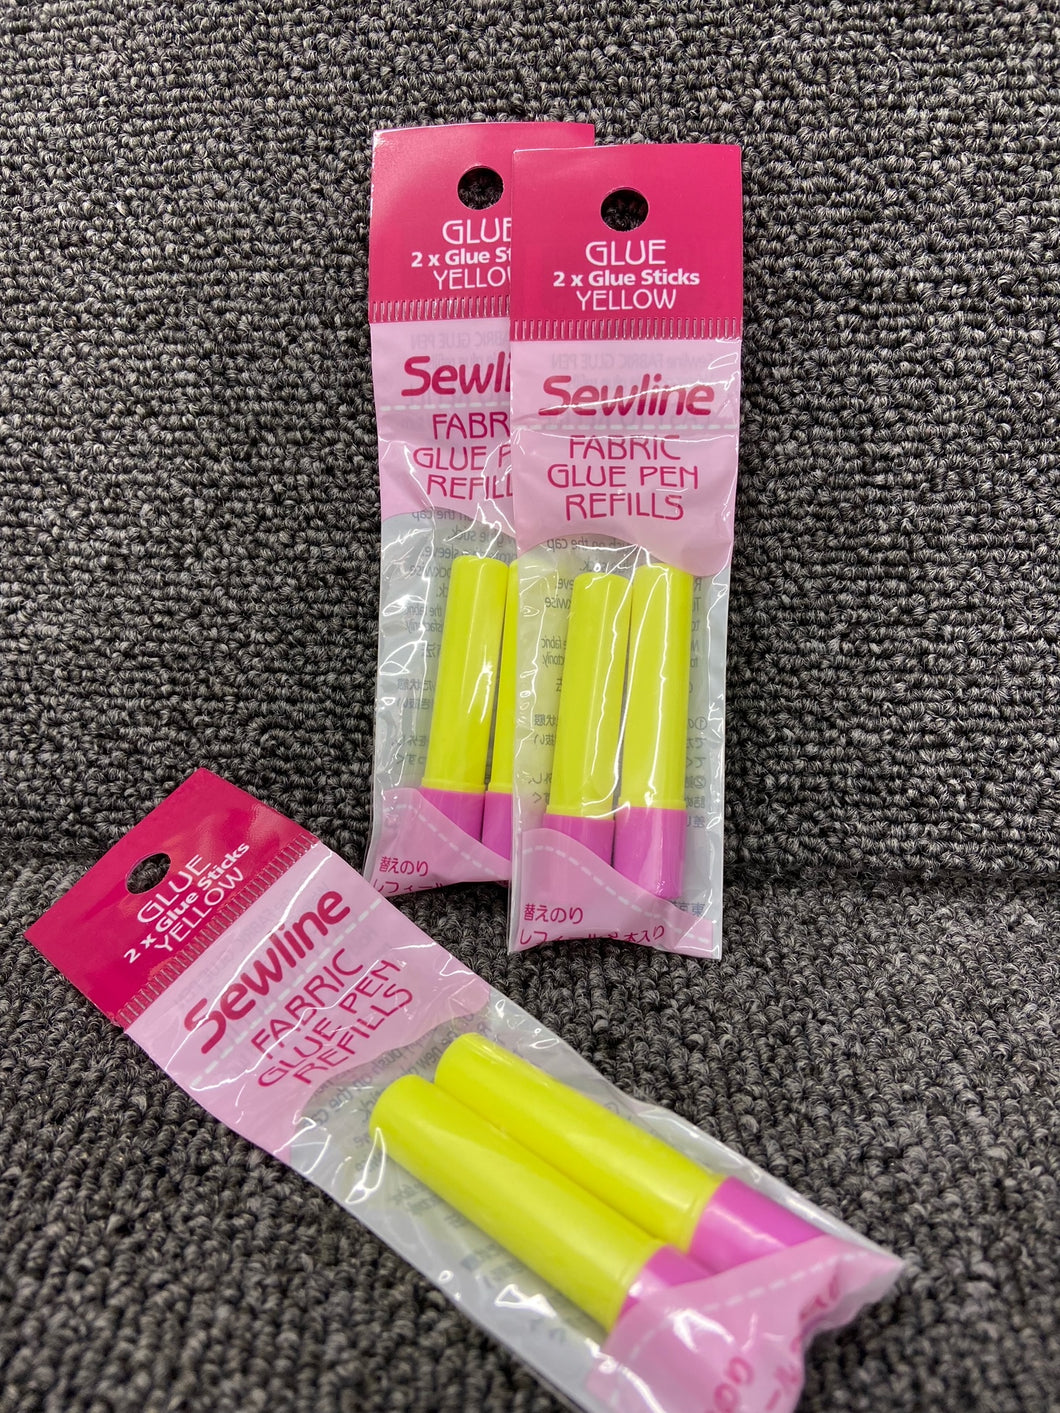 Sewline Fabric Glue Sticks this is for 2 Packs of 2 2 Pink and 2 Blue glue  Stick Refills 